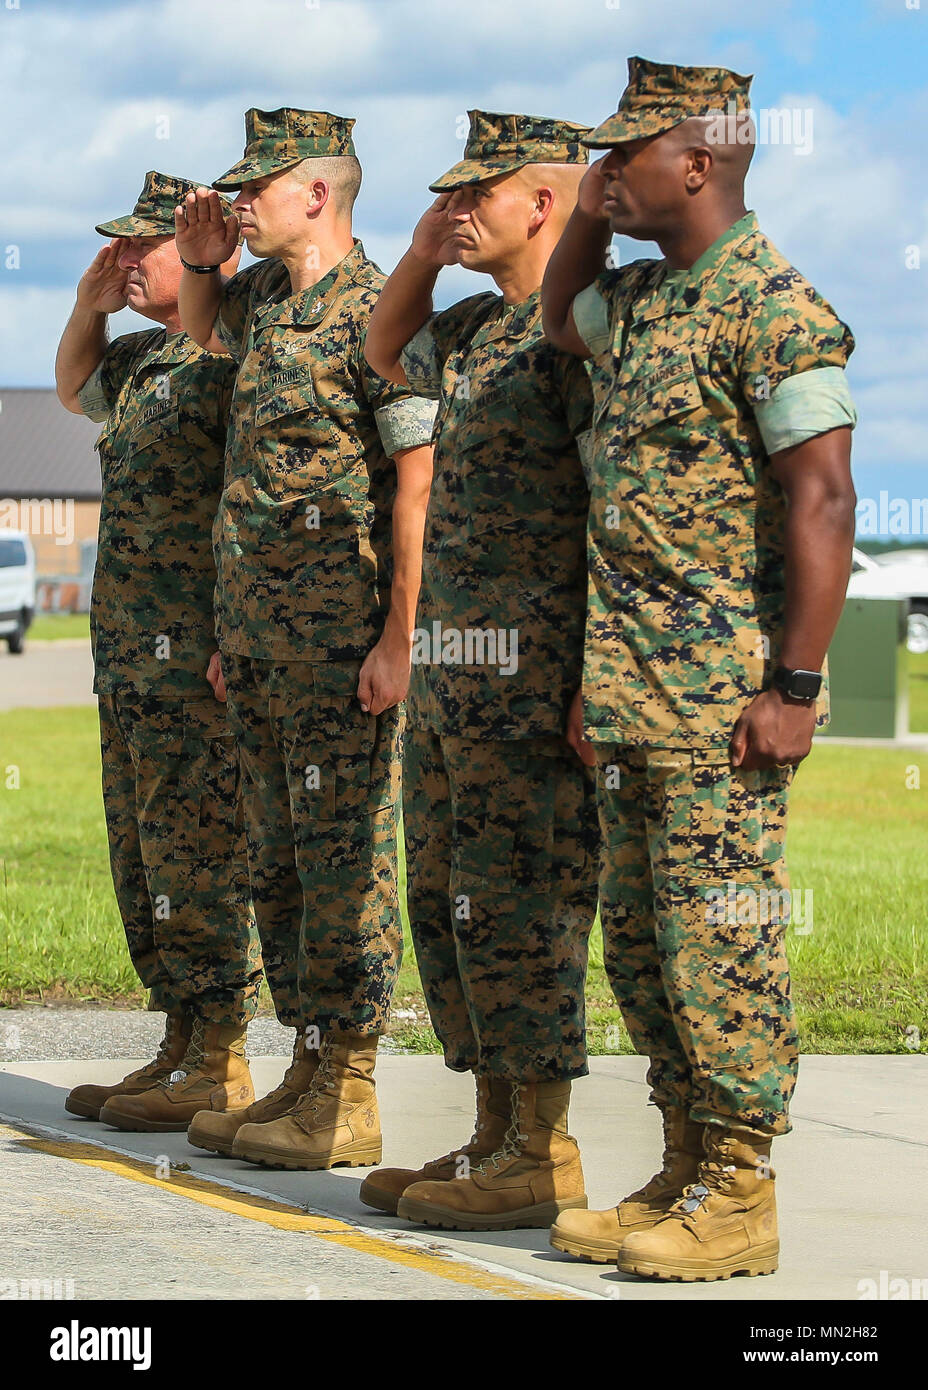 From left to right: Brig. Gen. Austin E. Renforth, Col. Timothy P. Miller, Sgt. Maj. Rafael Rodriguez, and Sgt. Maj. Derrick N. Mays salute as Secretary of the Navy, Richard V. Spencer lands aboard Marine Corps Air Station Beaufort, Aug. 10. During his visit, Spencer visited Marine Corps Recruit Depot Parris Island, attended a recruit graduation, visited Marine Aircraft Group 31 and Marine Fighter Attack Training Squadron 501 to learn about the F-35B. Spencer was sworn into office Aug. 3, 2017.  Renforth is the commanding general of Marine Corps Recruit Depot Parris Island and Eastern Recruiti Stock Photo